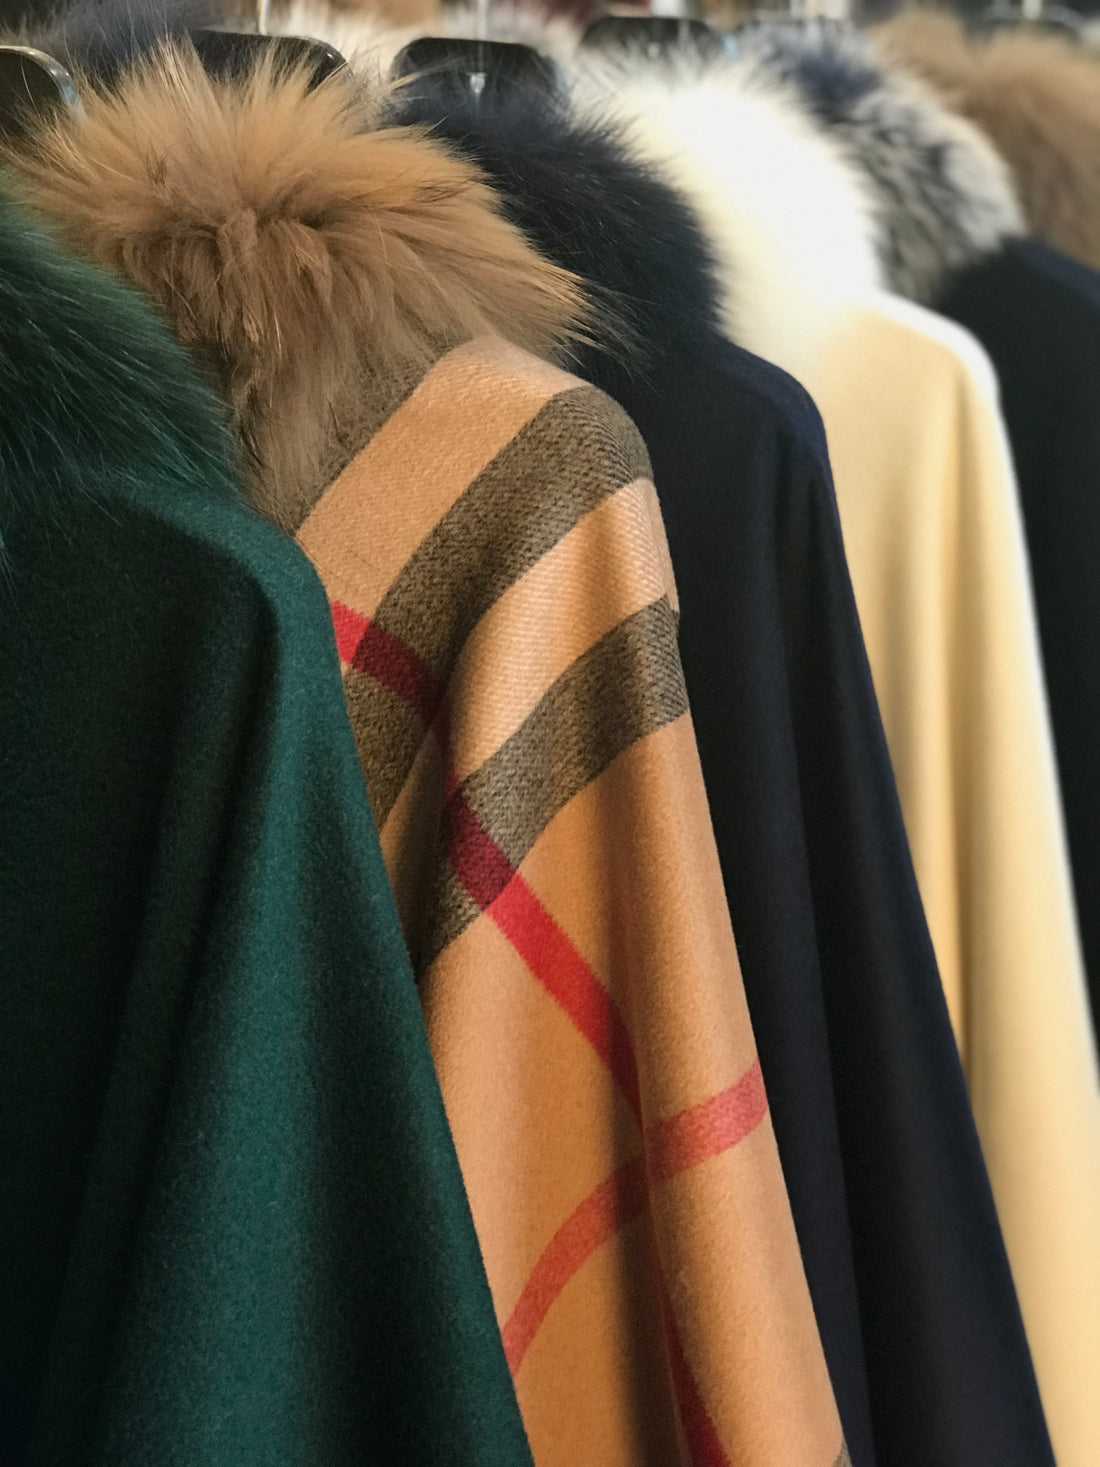 Clothes Moths in the Fur Closet? The Do’s and Don’ts